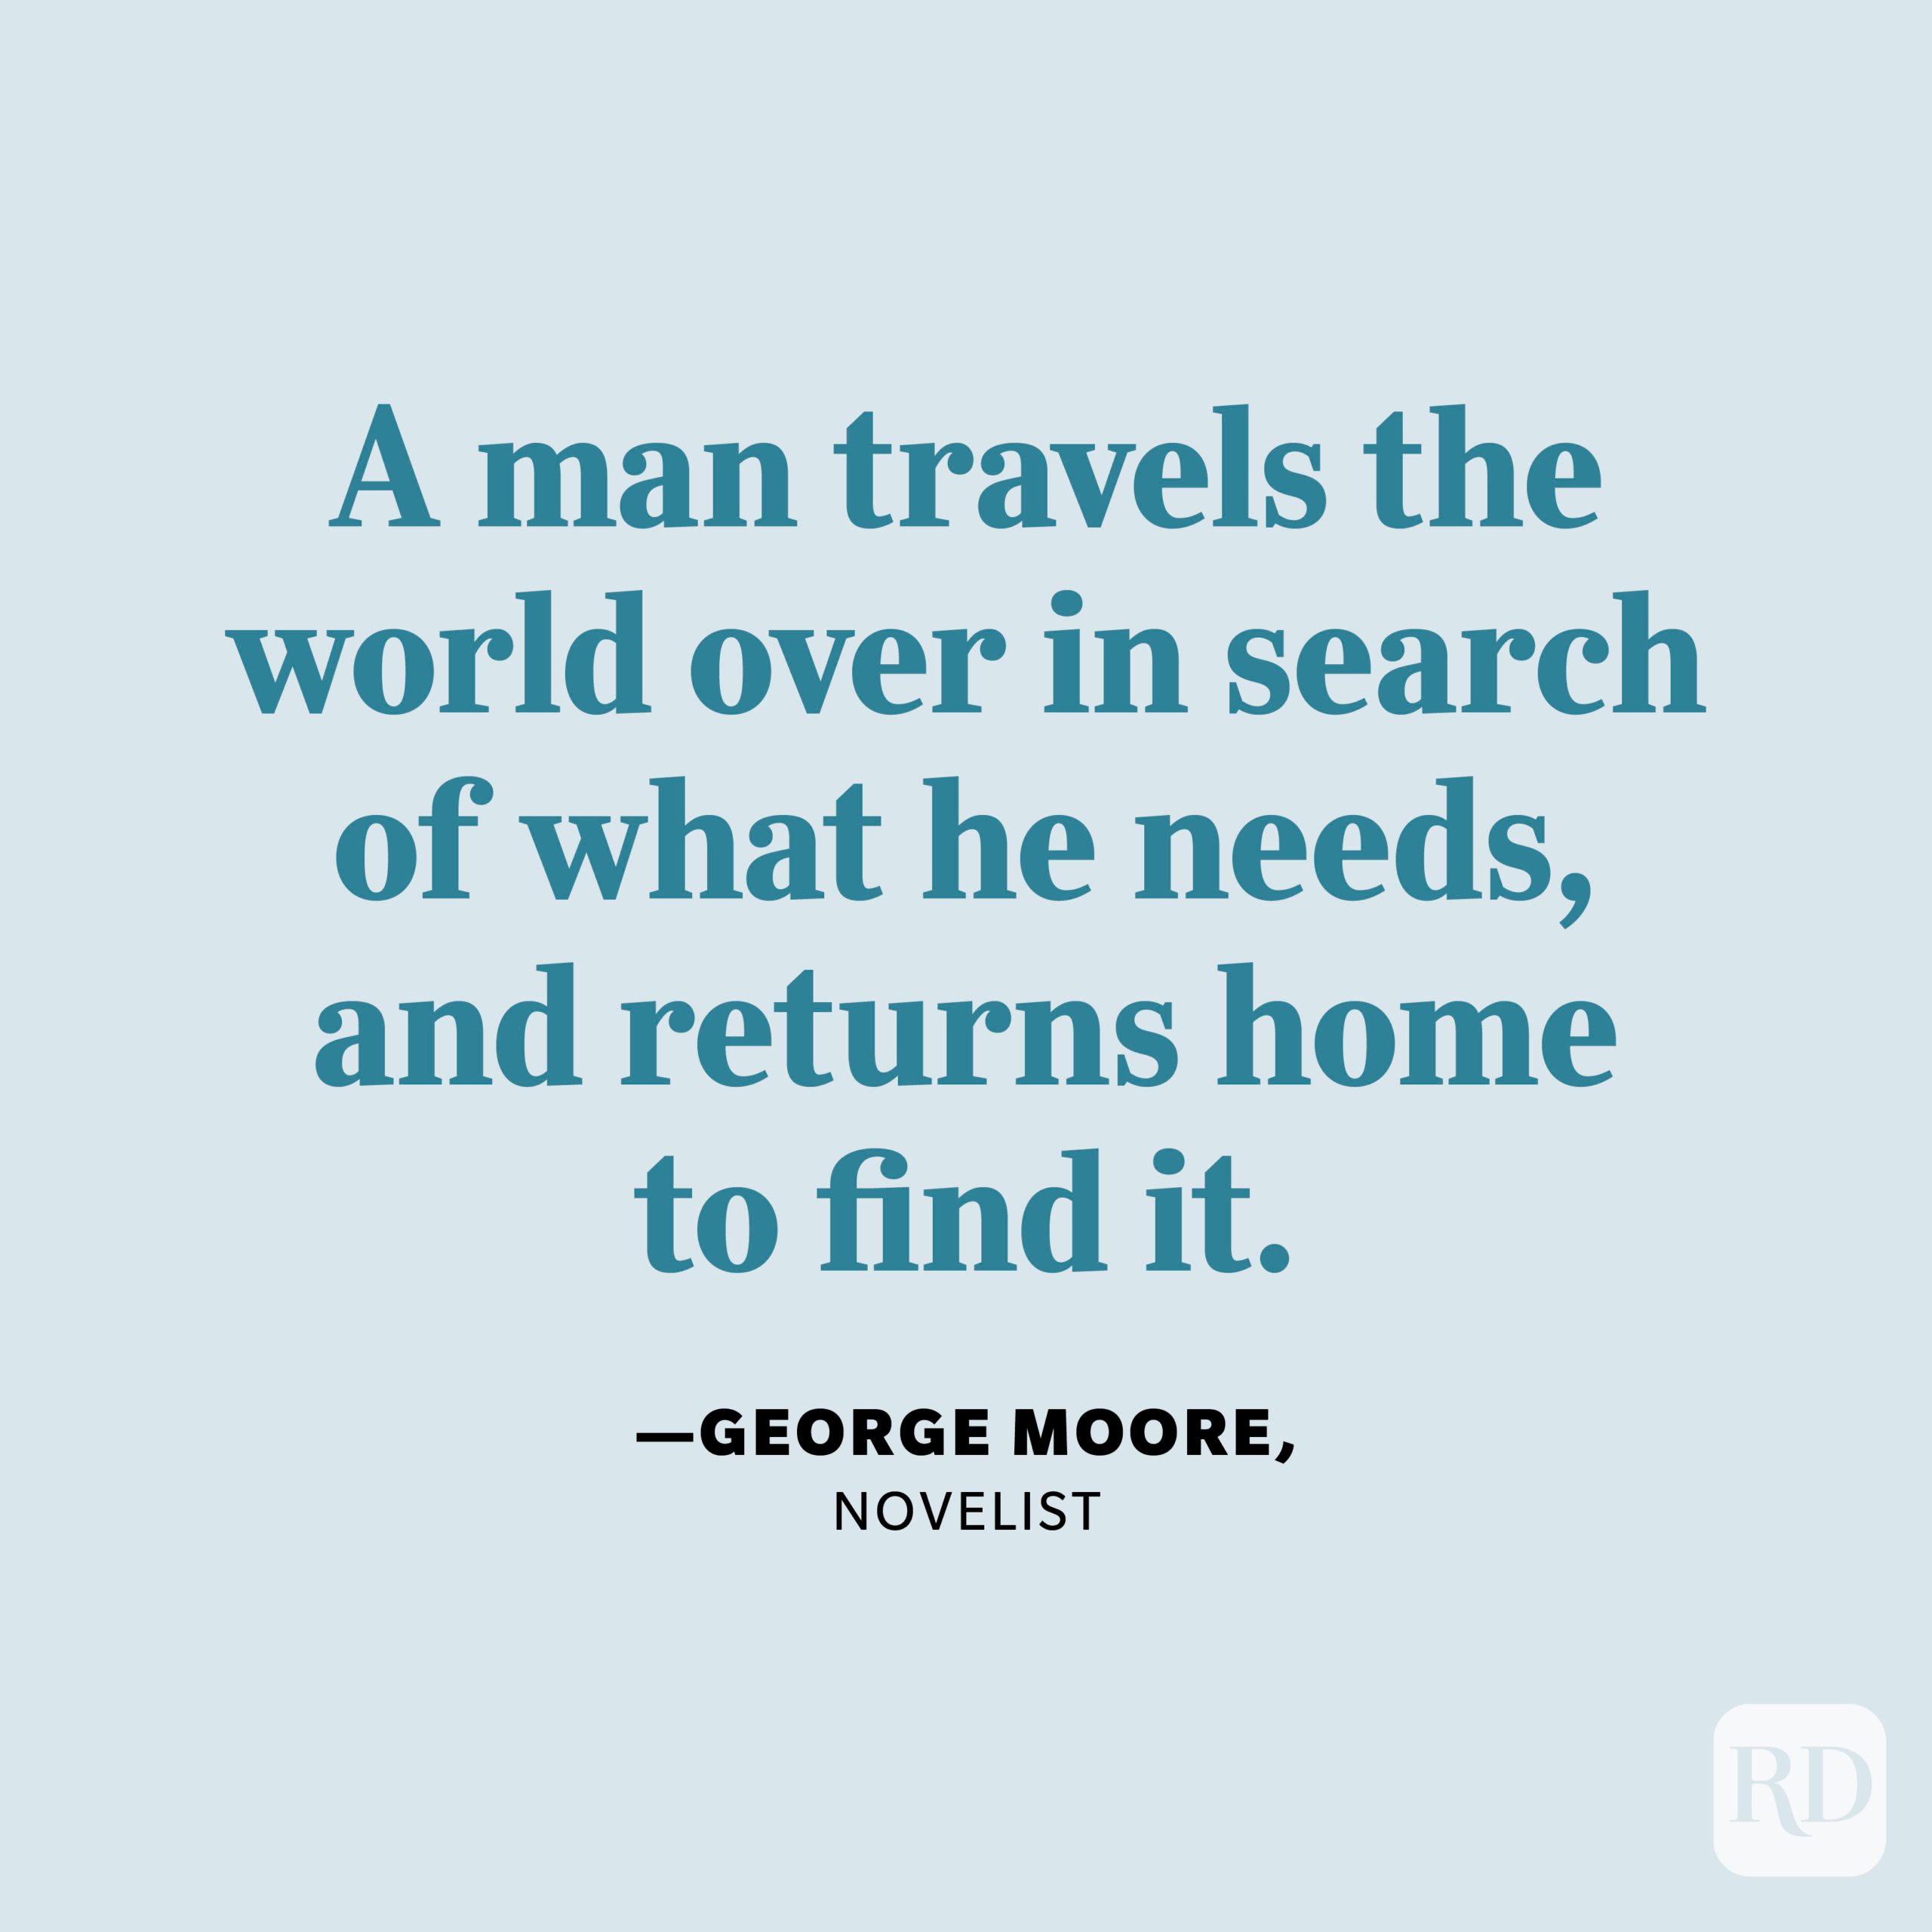 "A man travels the world over in search of what he needs, and returns home to find it." —George Moore, novelist